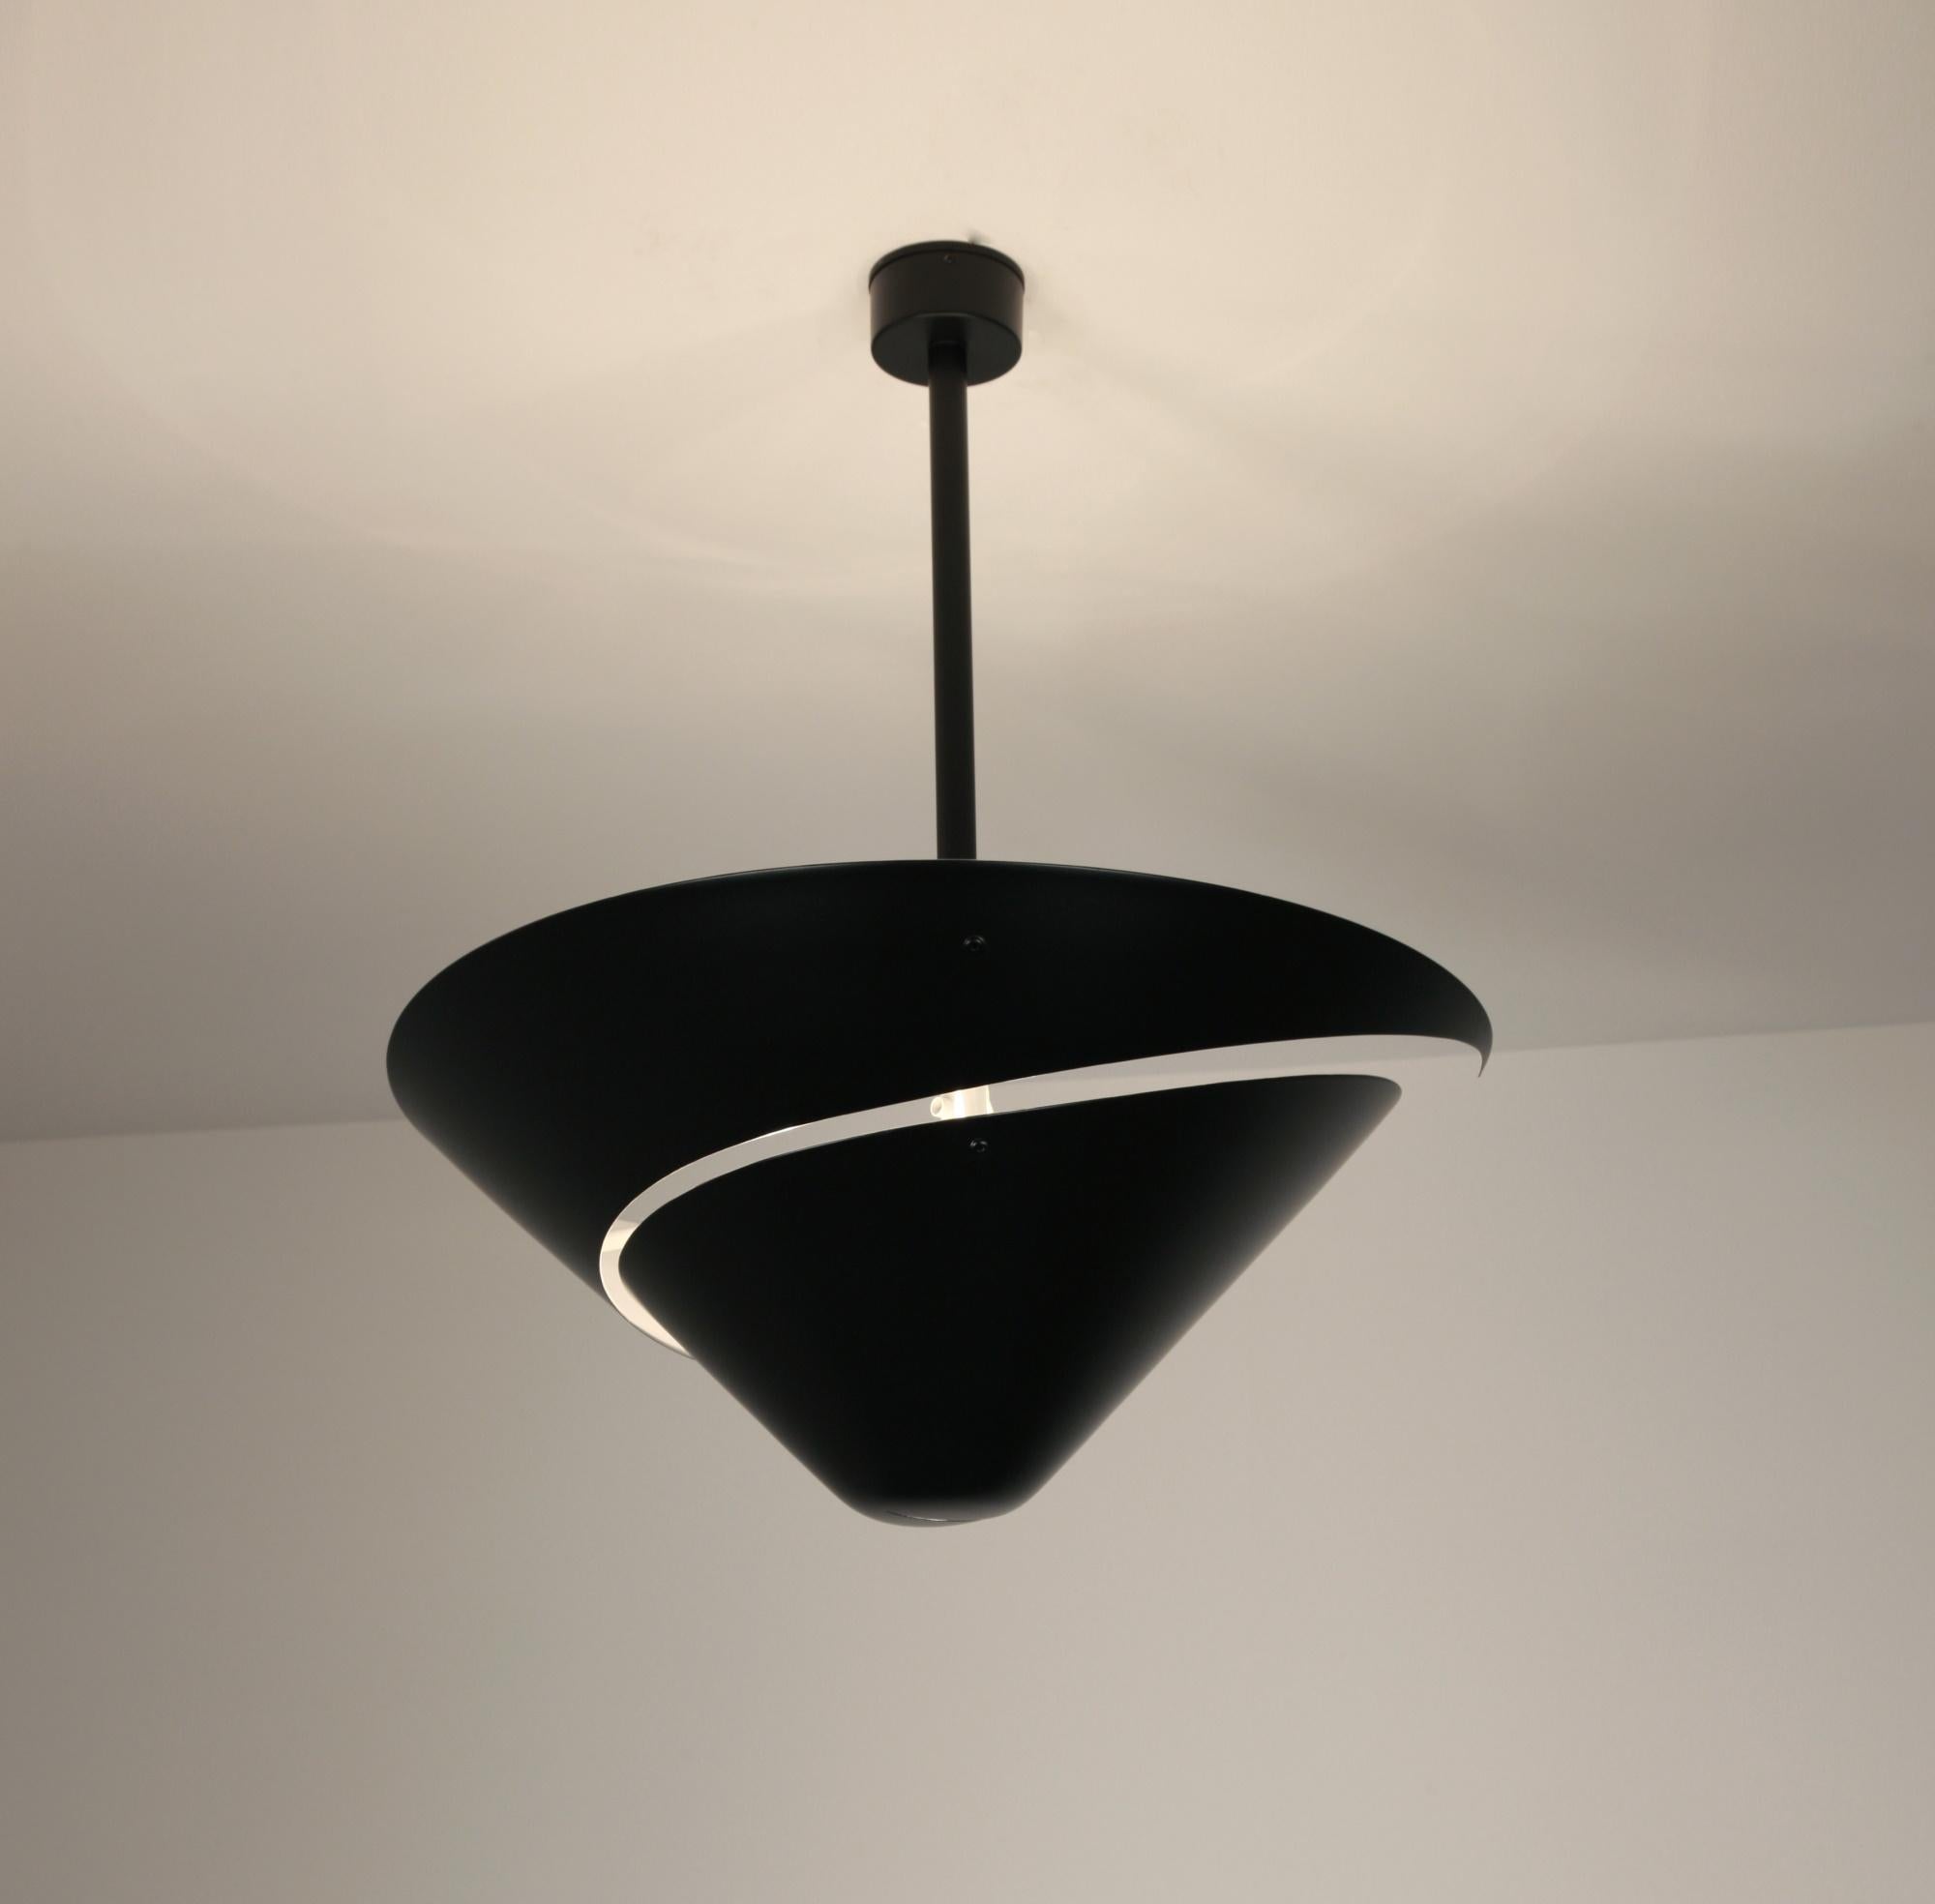 A snail shell provides the inspiration for this lamp with its swirling cut out in the circular shade. Light projects downward through the opening while the shade causes light to reflect from the ceiling.

Custom drop lengths upon approval.